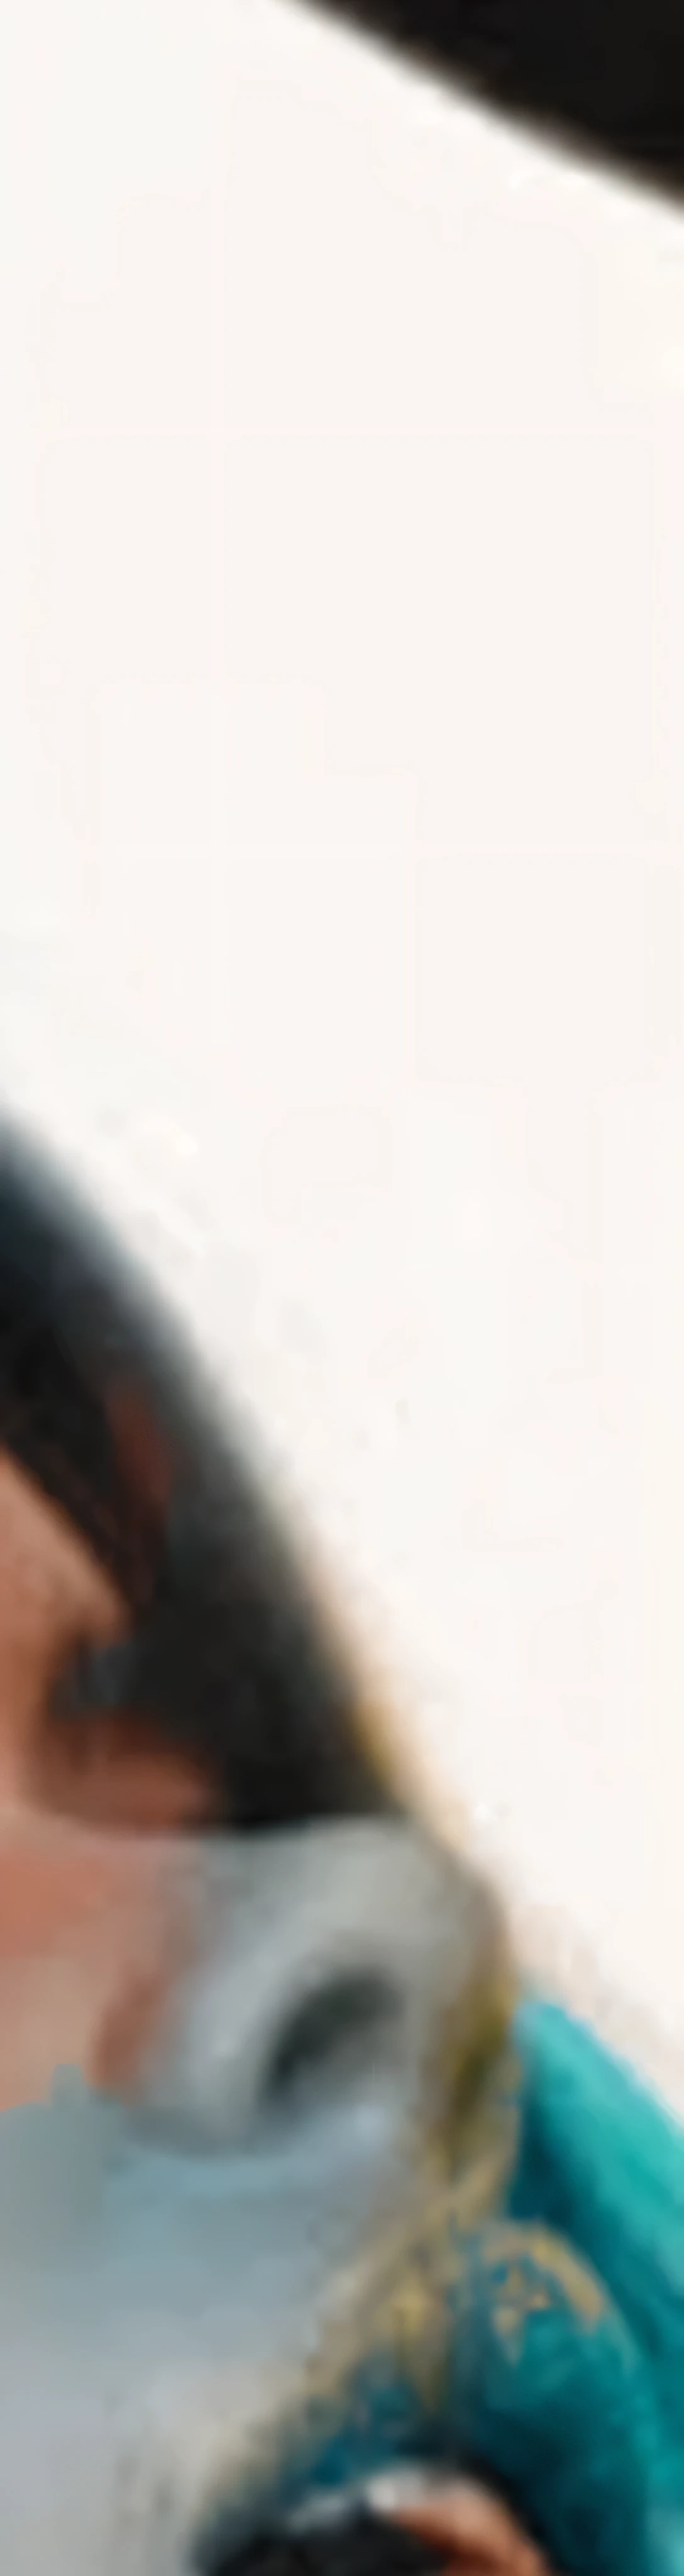 woman with a black hair ,unblur, no blur, malika favre, ultra high quality, detailing, detail, taliyah, ultradetailed, zoomed, innocent look, banner, vintage vibe, neck zoomed in, headshot, smug look, ultrarealistic